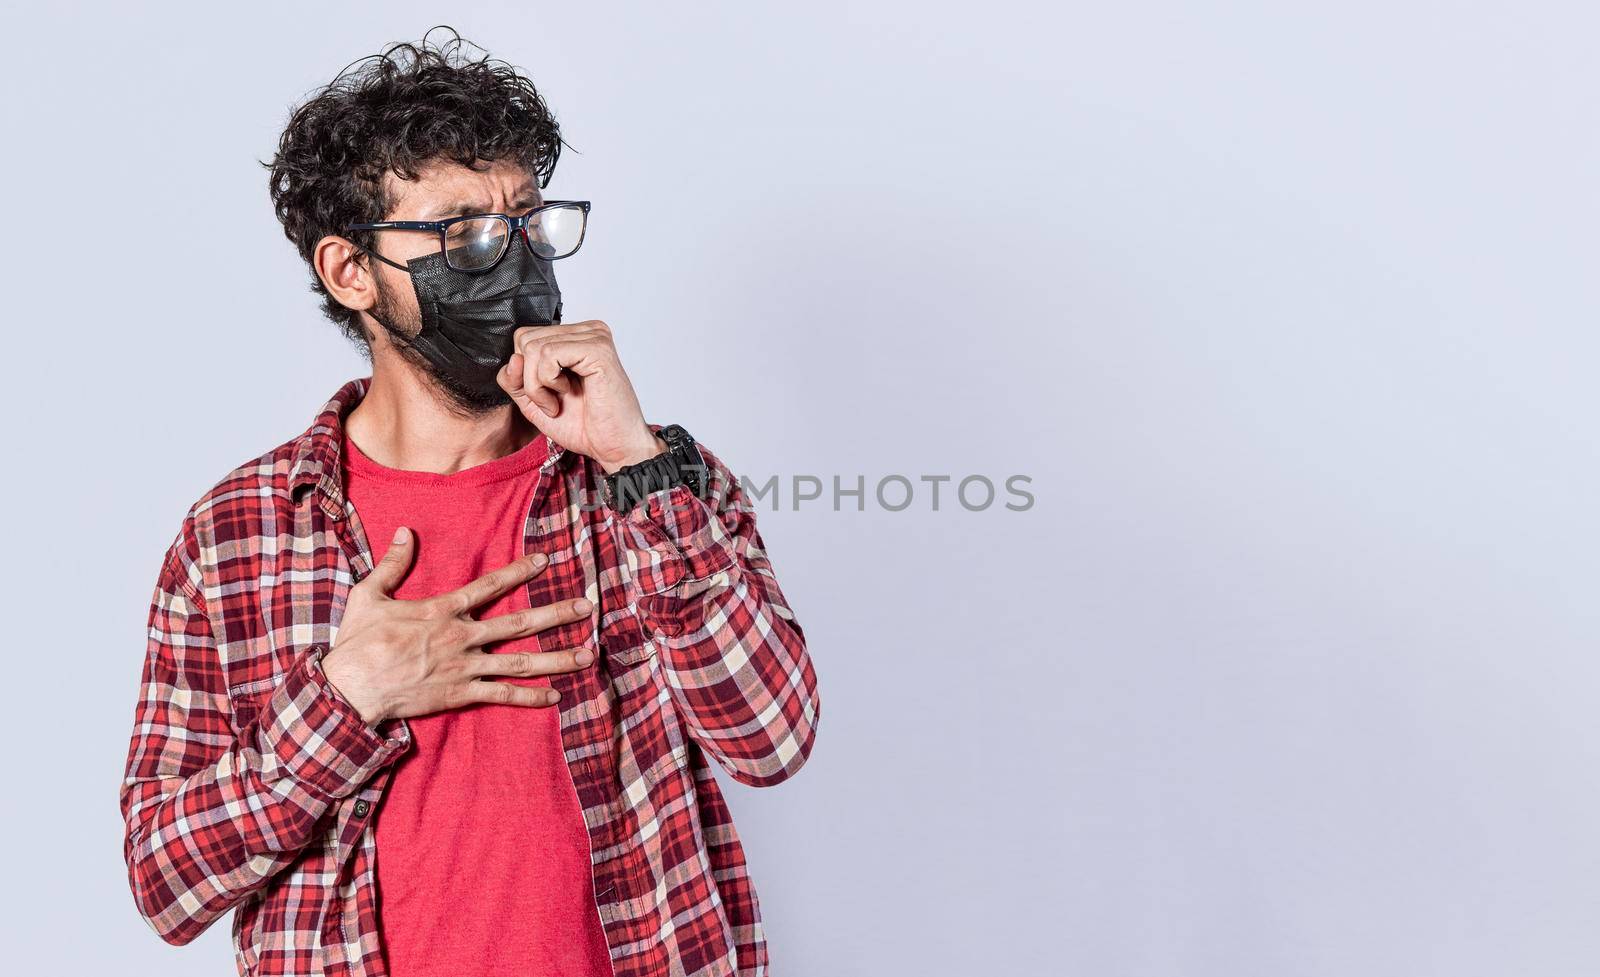 Man coughing with surgical mask, coronavirus outbreak, social distancing and respiratory problems concept by isaiphoto